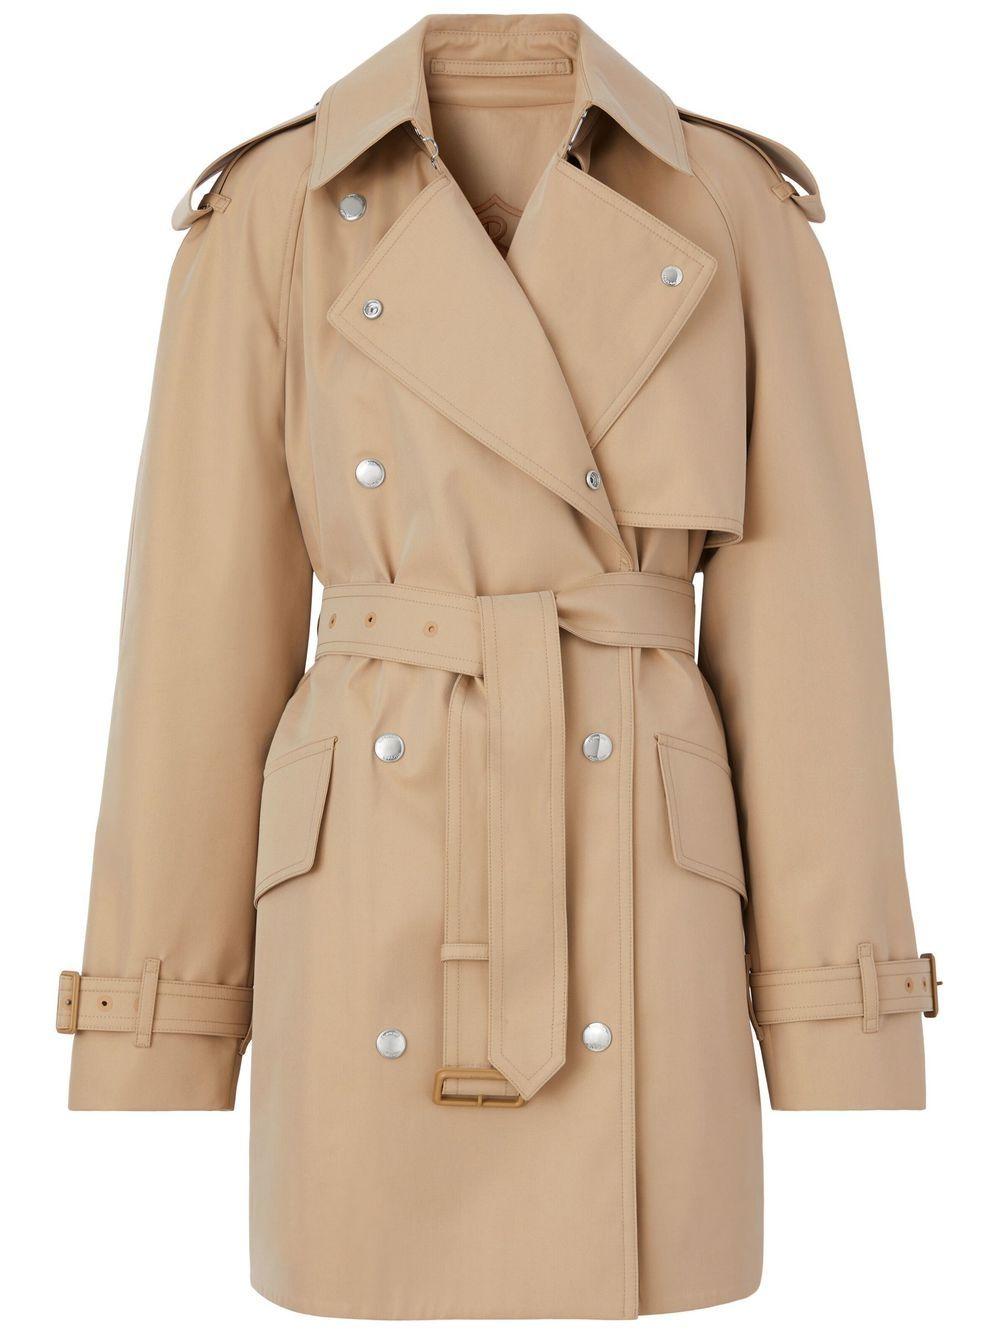 Burberry Bonded Cotton Gabardine Trench Coat in Natural | Lyst Canada